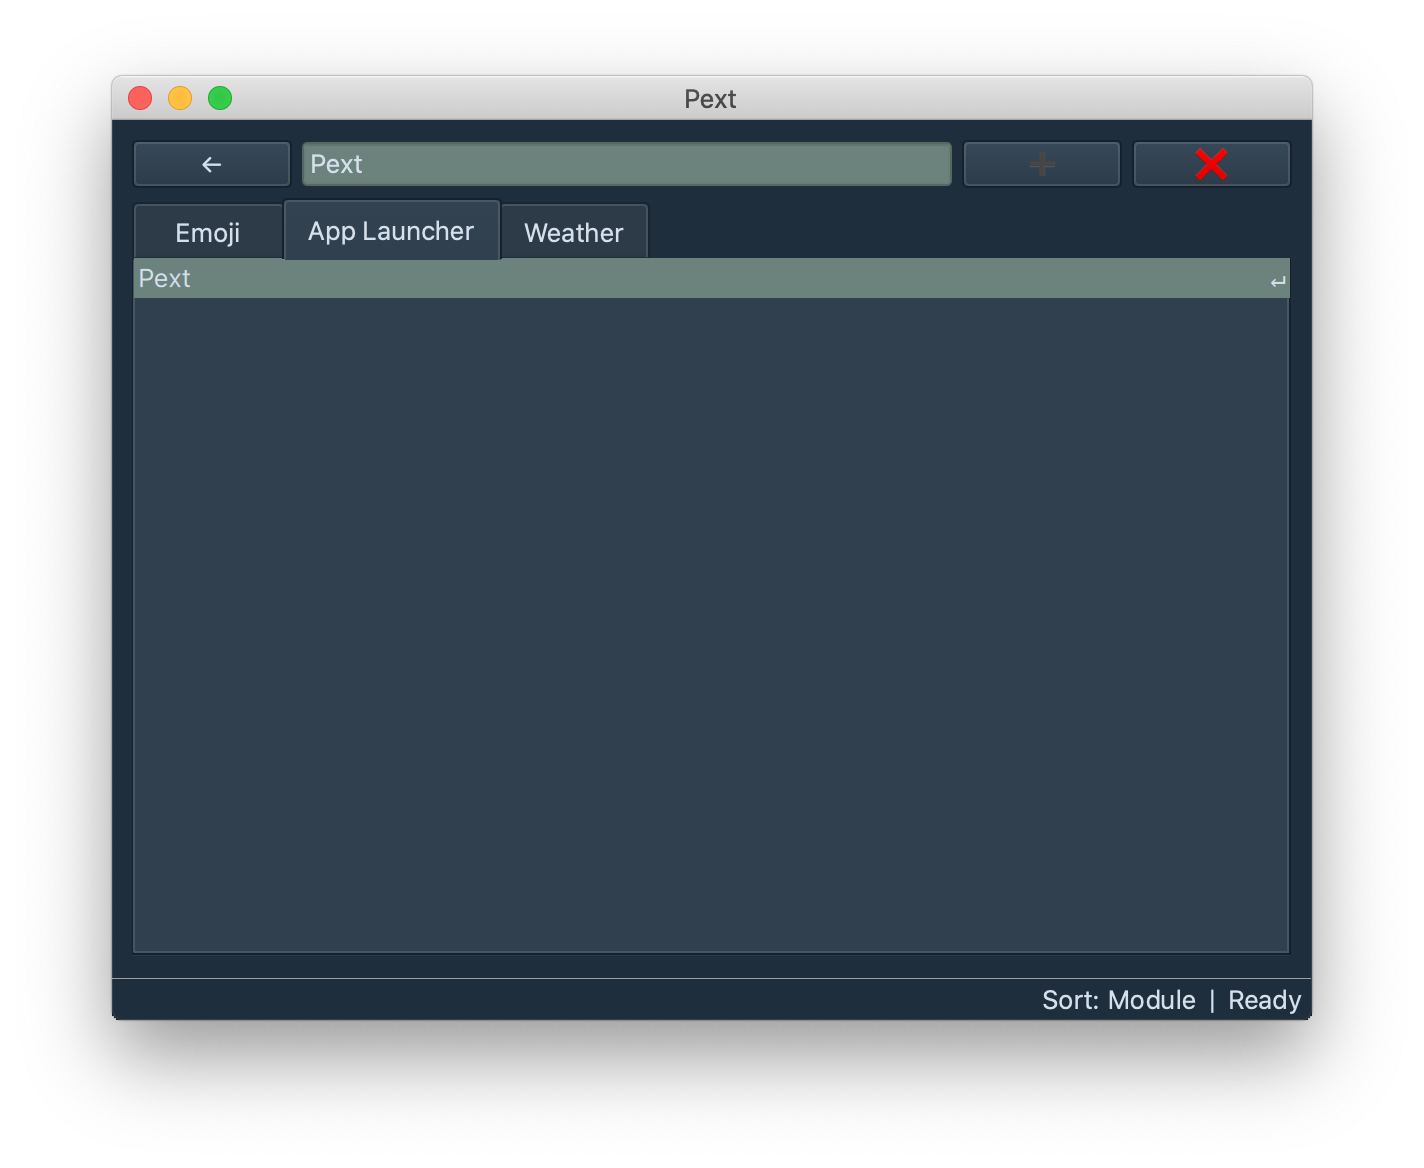 Screenshot of the Pext module for displaying a list of apps to launch running macOS